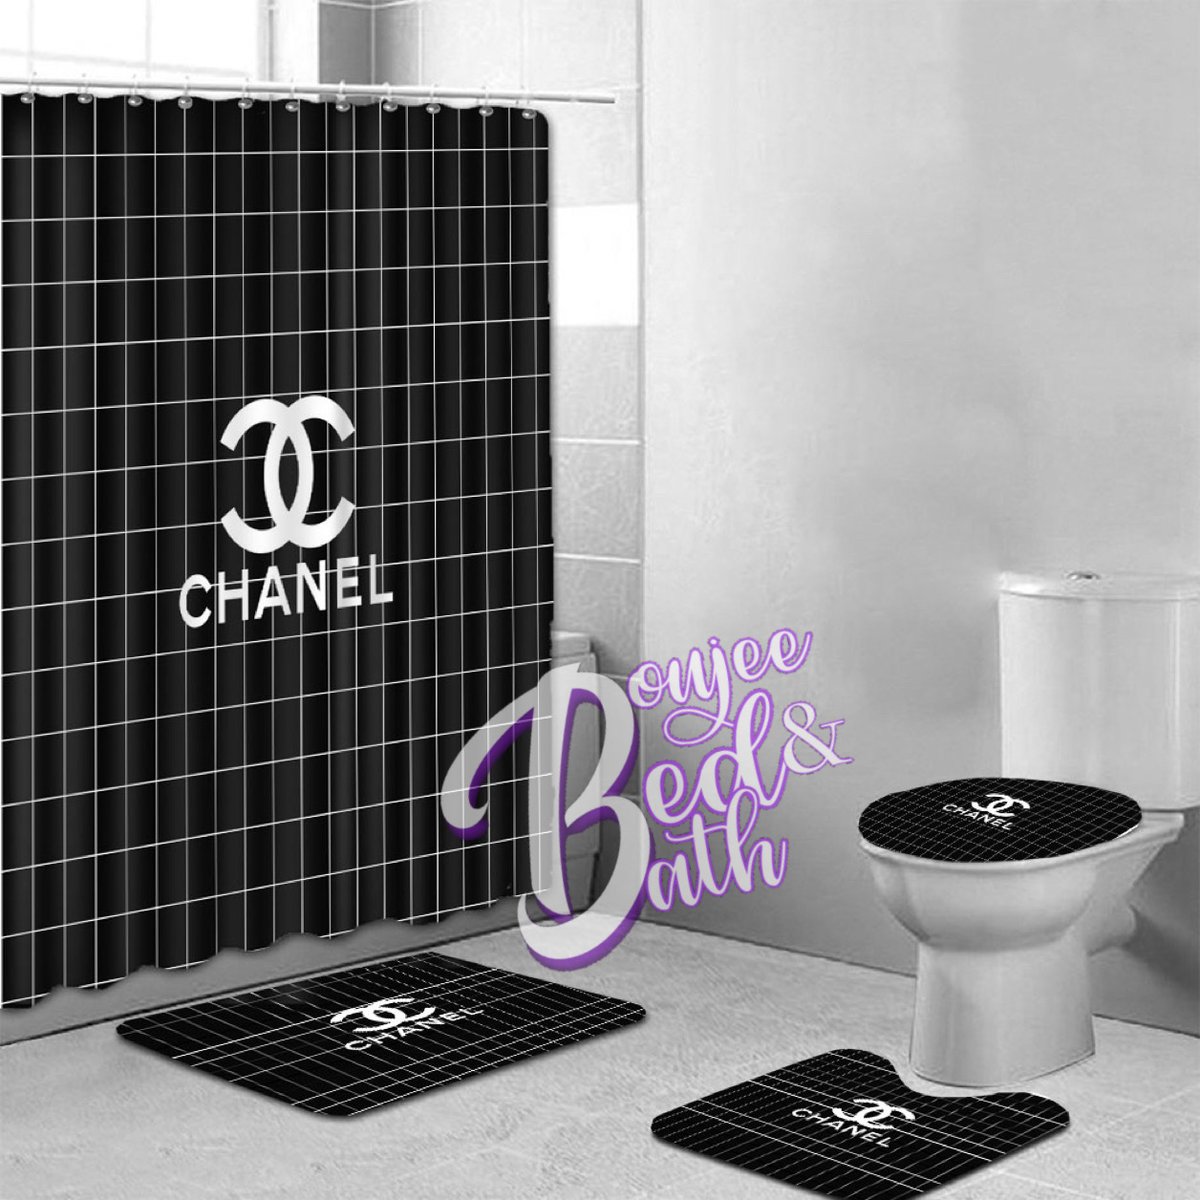 Chanel 4 in 1 Bathroom sets wi  Order from Rikeys faster and cheaper